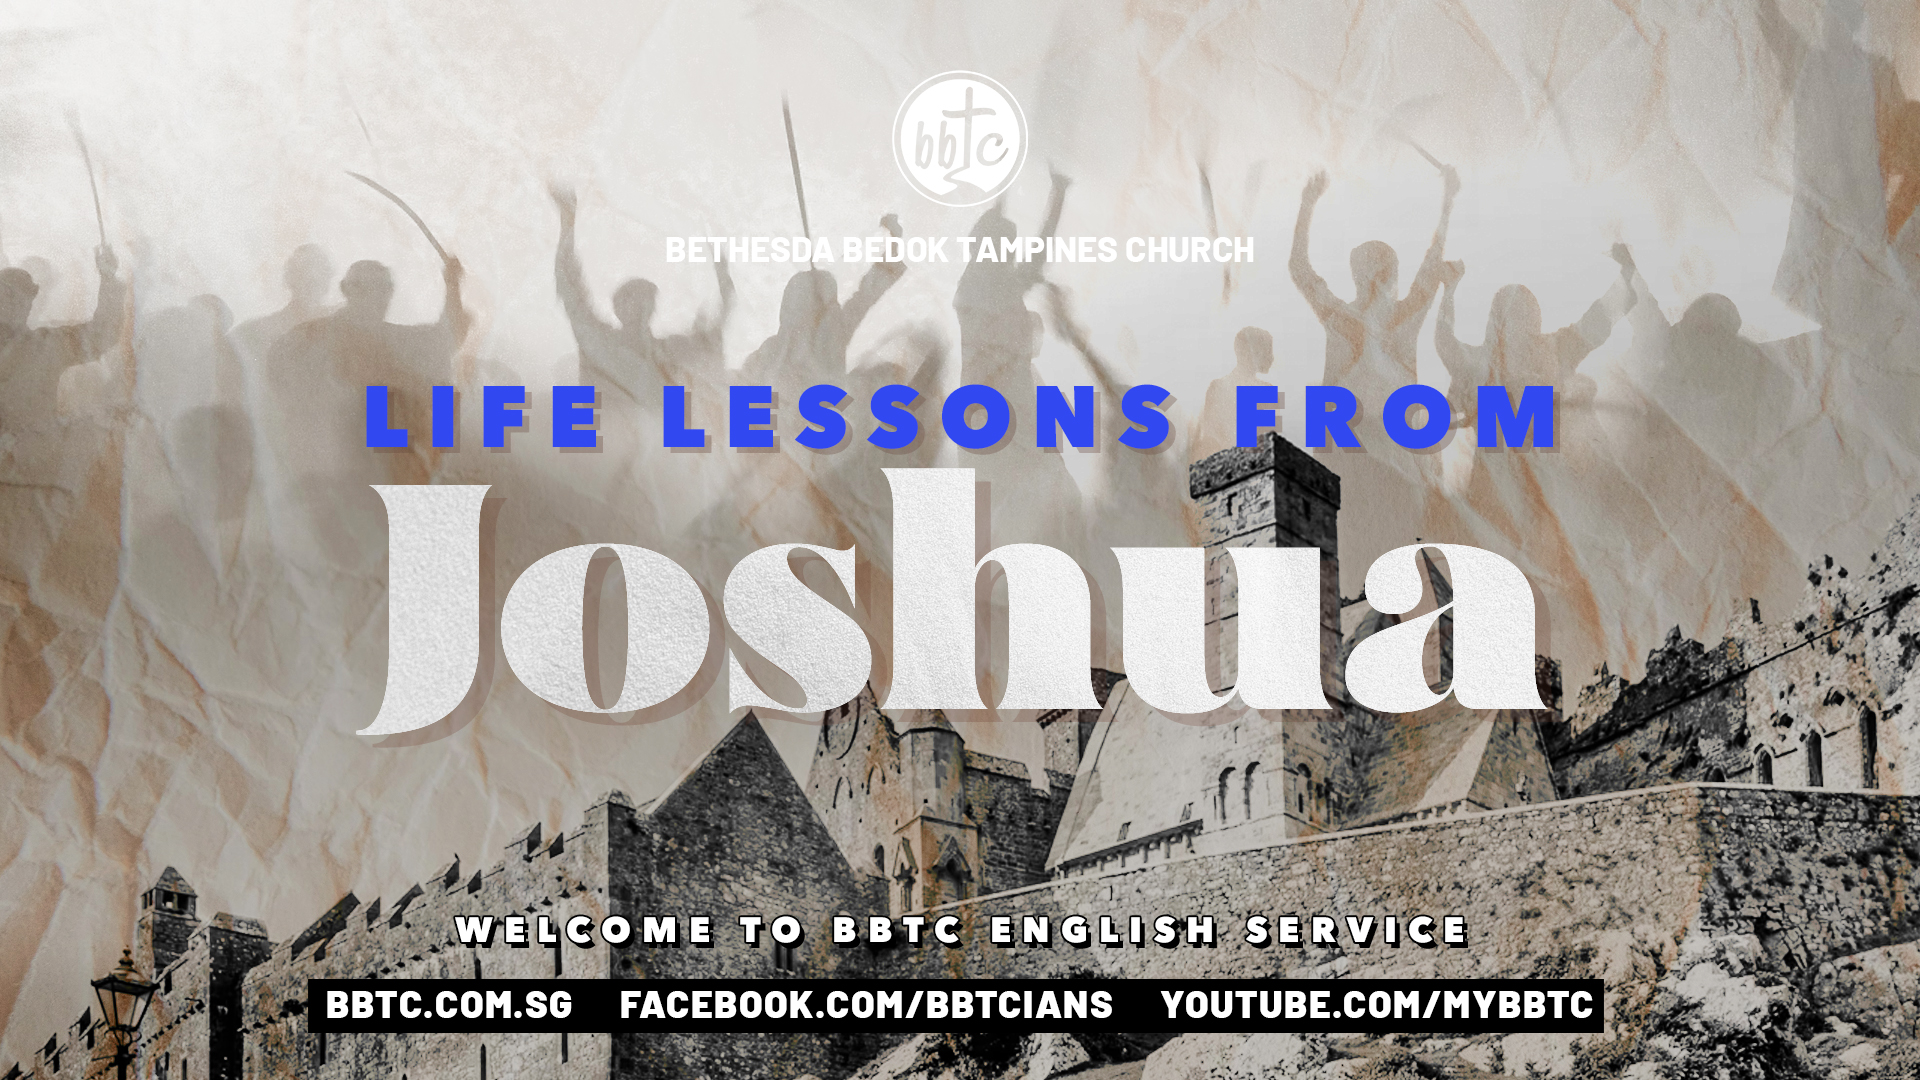 LIFE LESSONS FROM JOSHUA